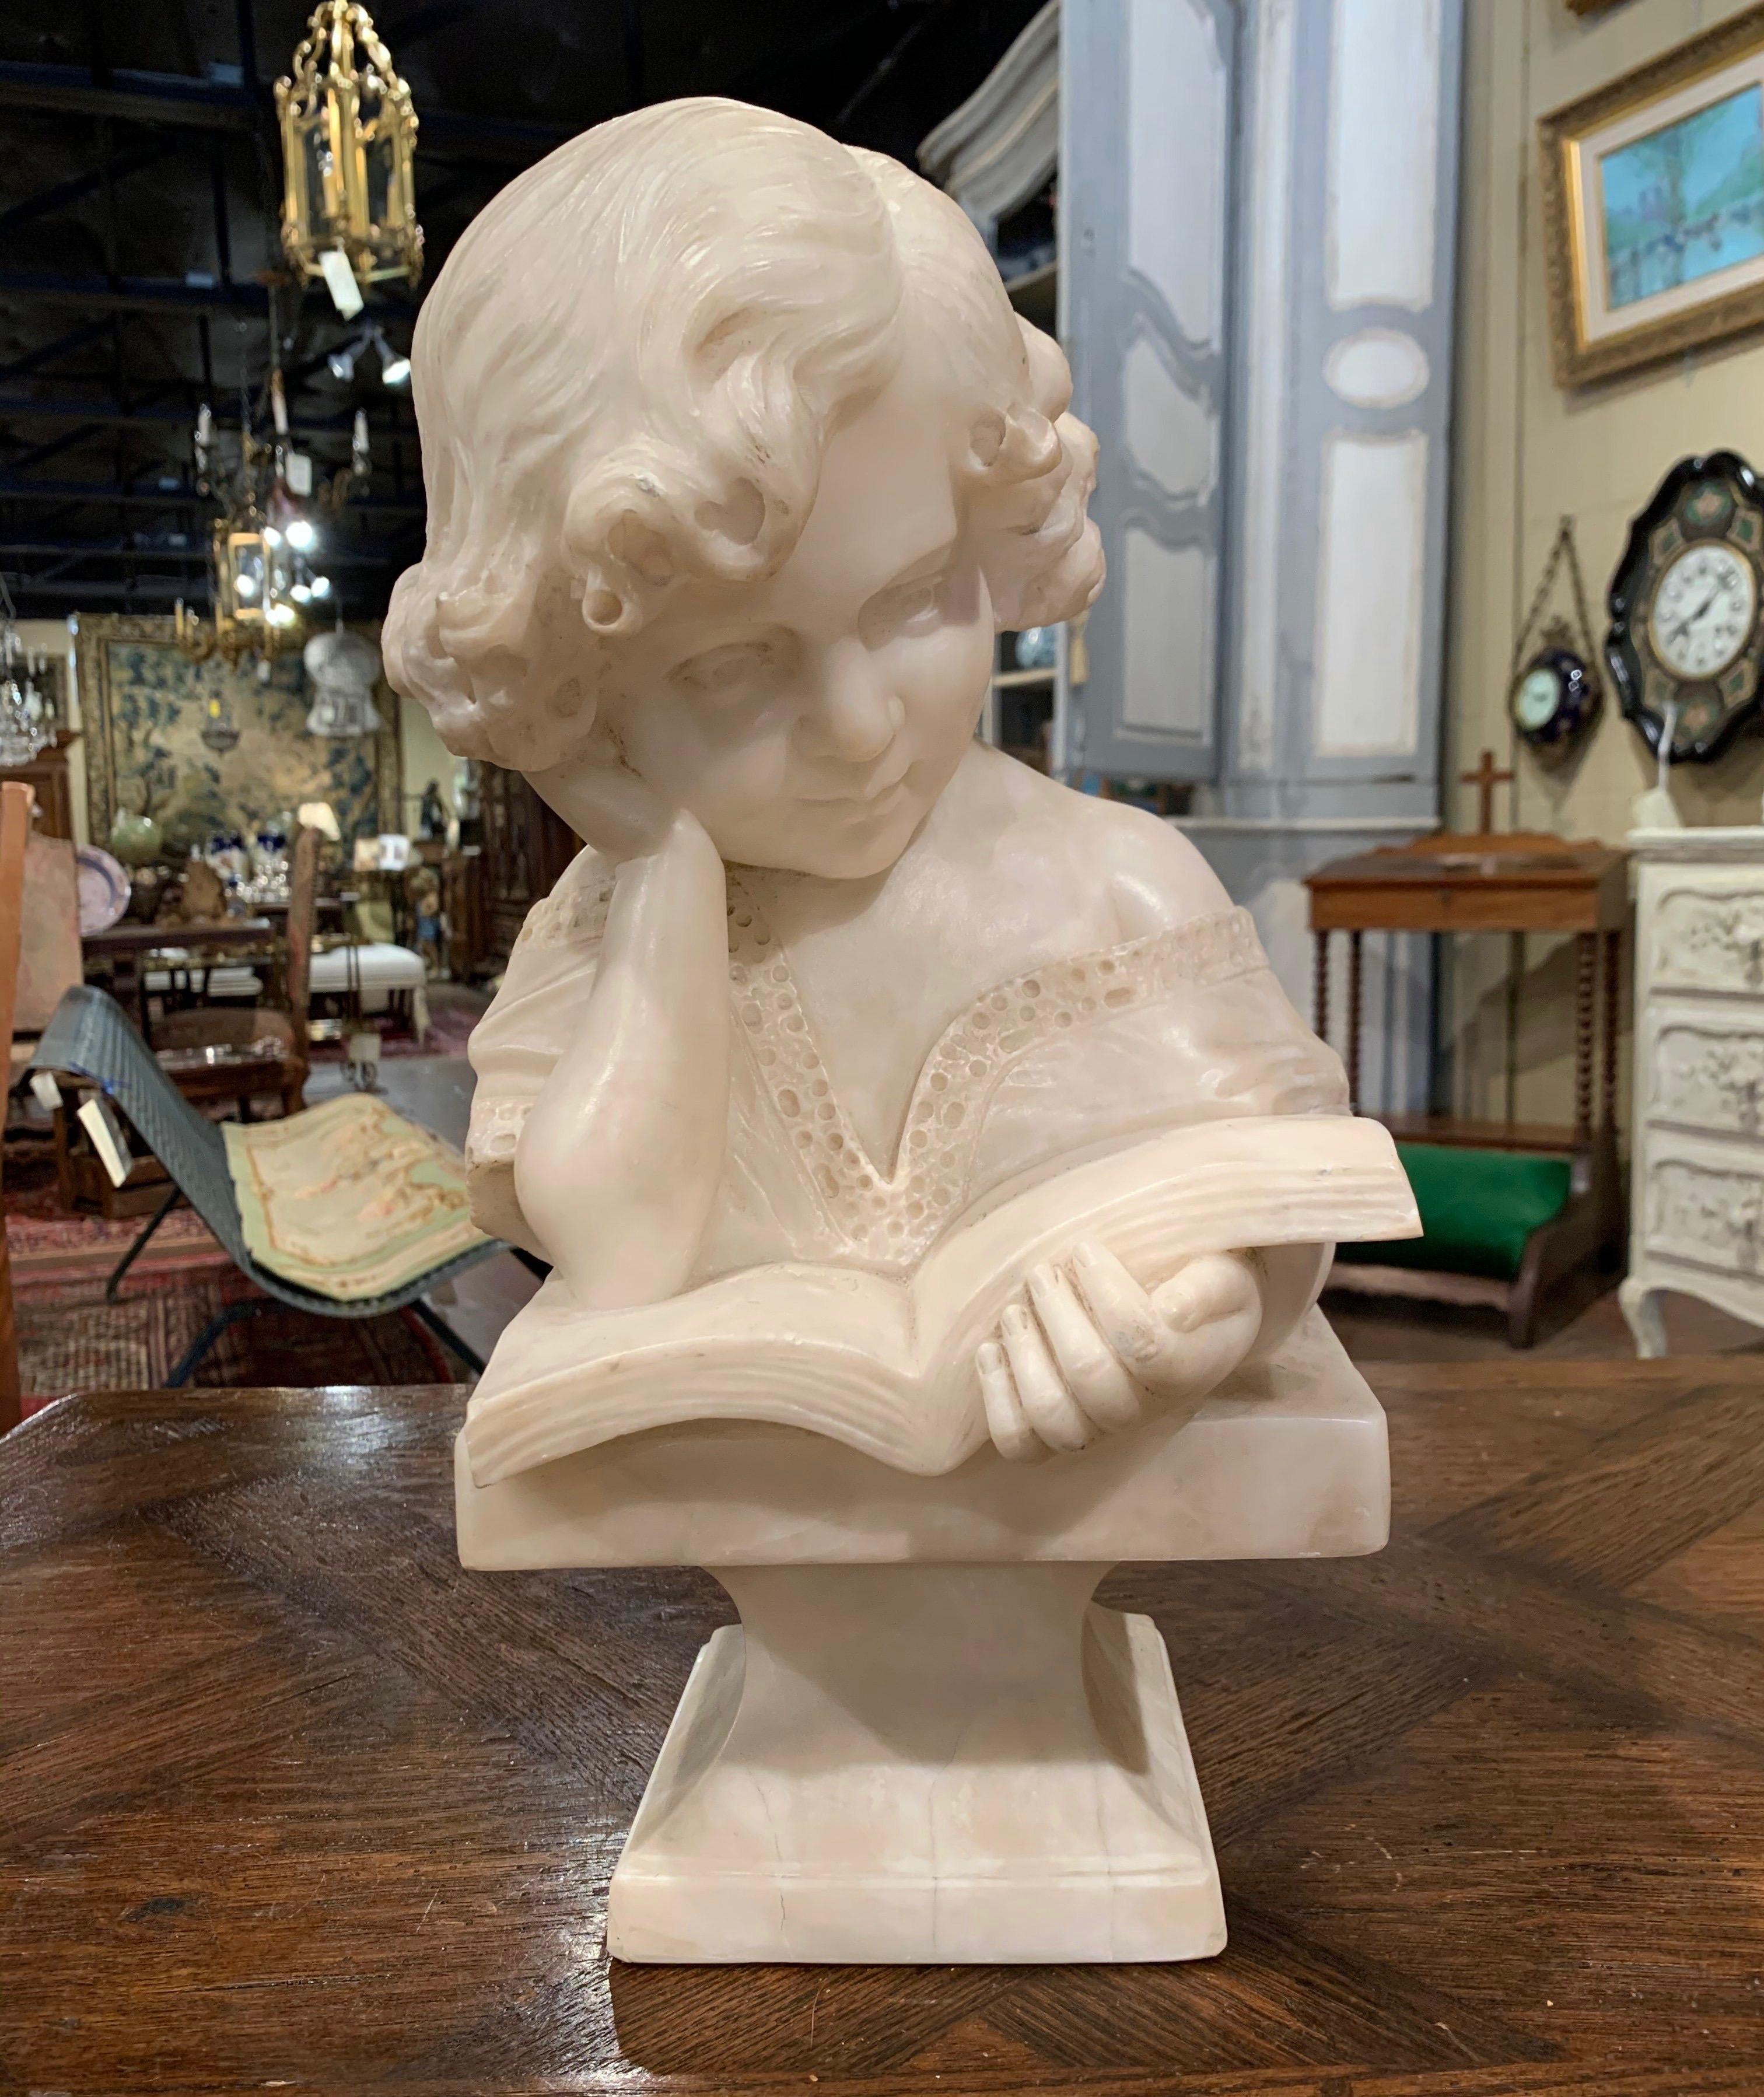 Crafted in Italy circa 1880, the carved bust stands on an attached square base and depicts a young lady reading a book one hand holding her head. The sculpture is well done with wonderful details including the lace collar, her curly hair and her